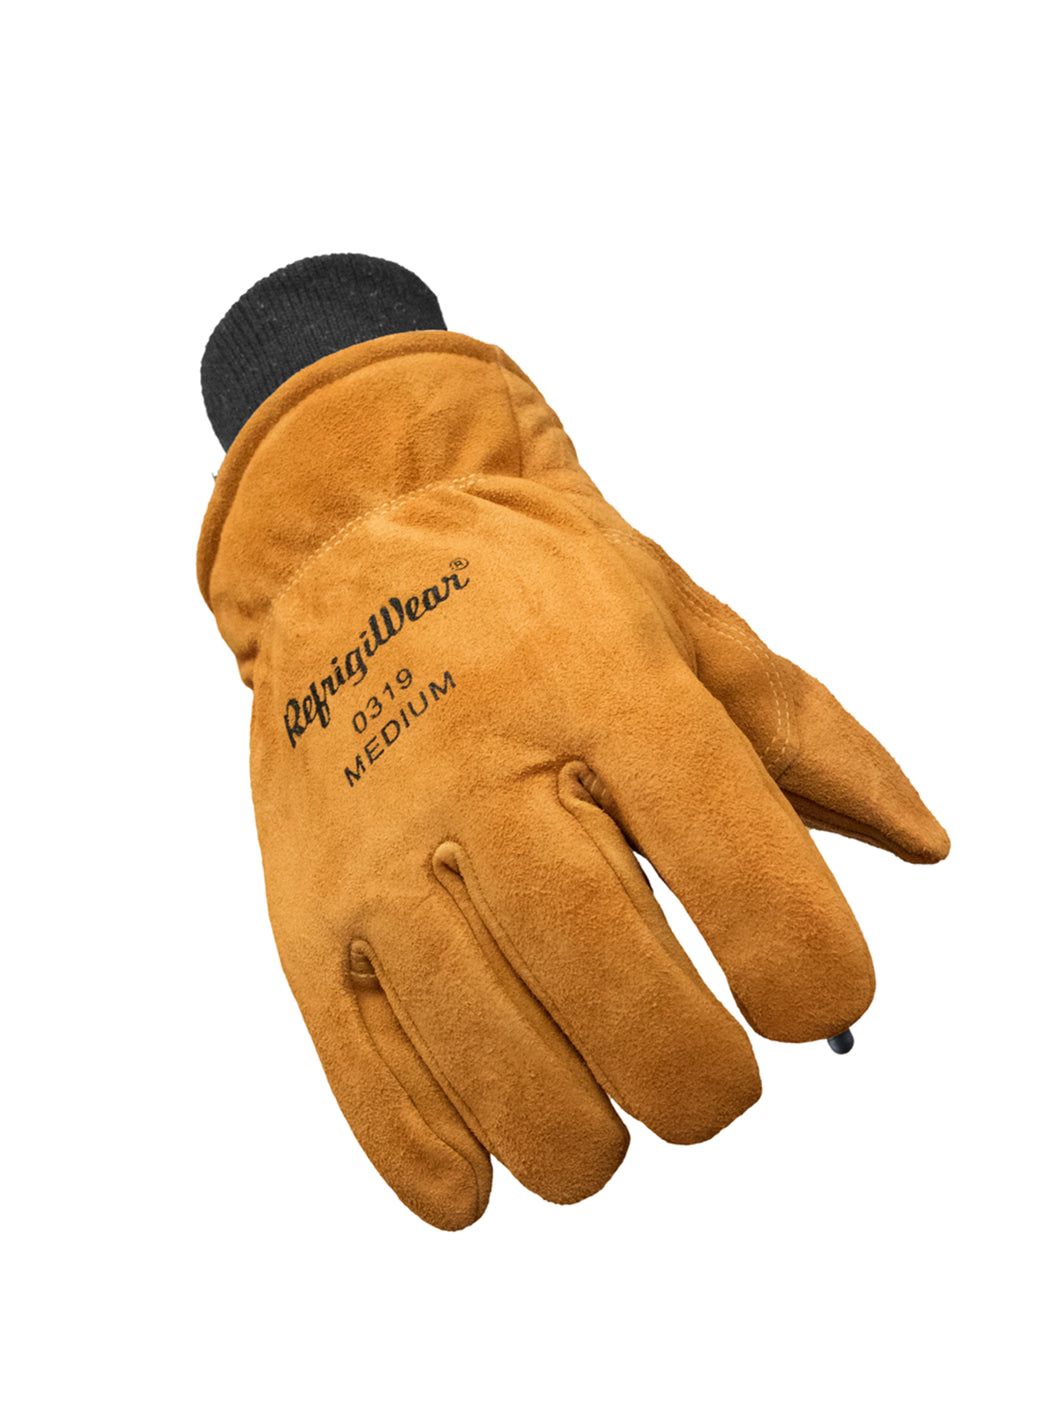 Insulated Cowhide Leather Glove with Key-Rite Nib